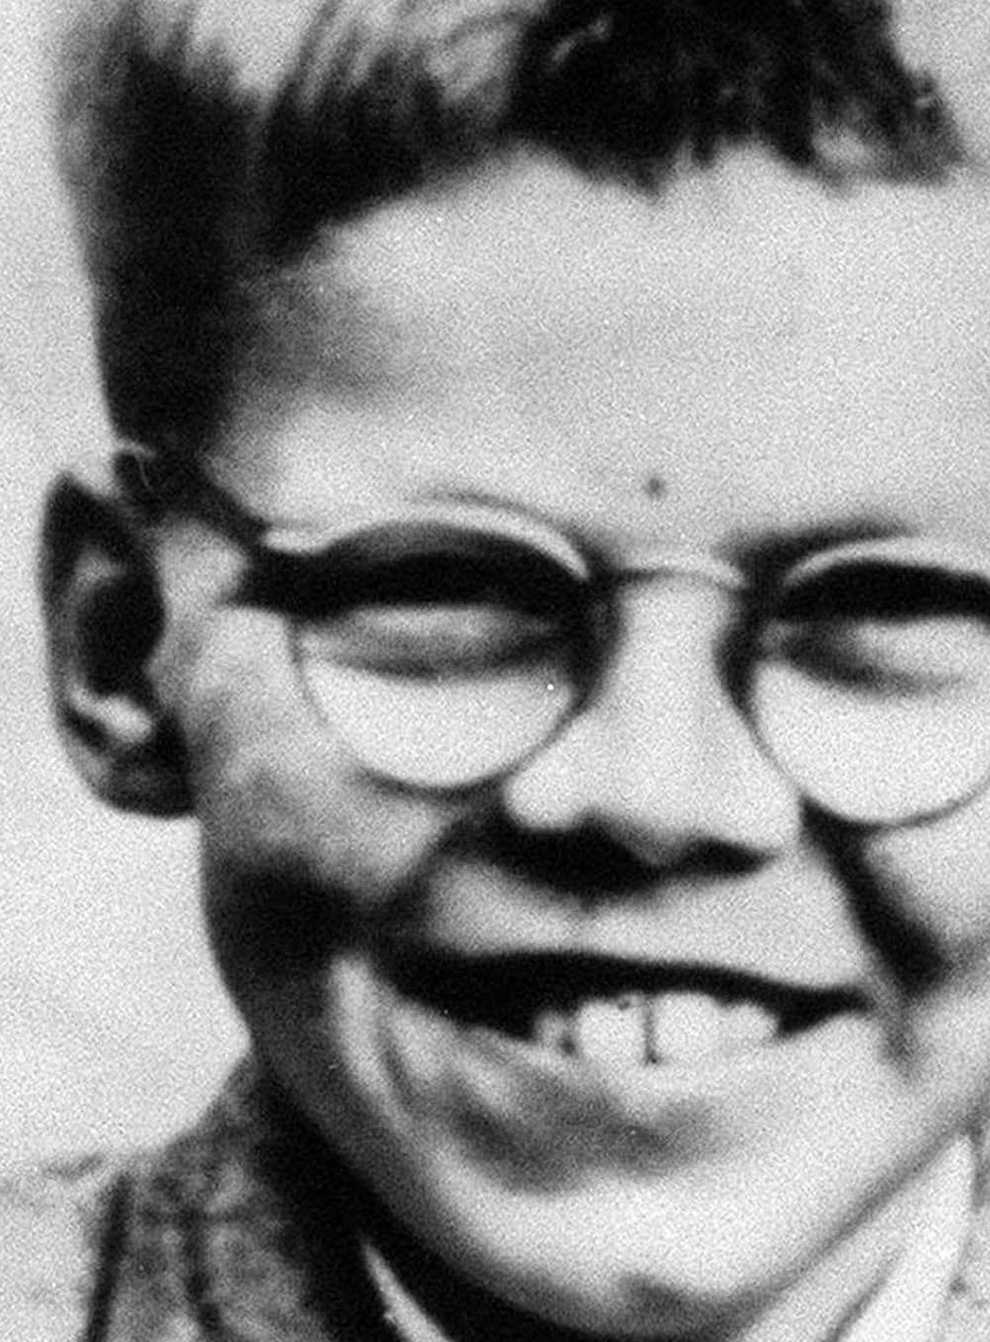 Keith Bennett was murdered by Myra Hindley and Ian Brady in 1964 but his body has never been found (PA)